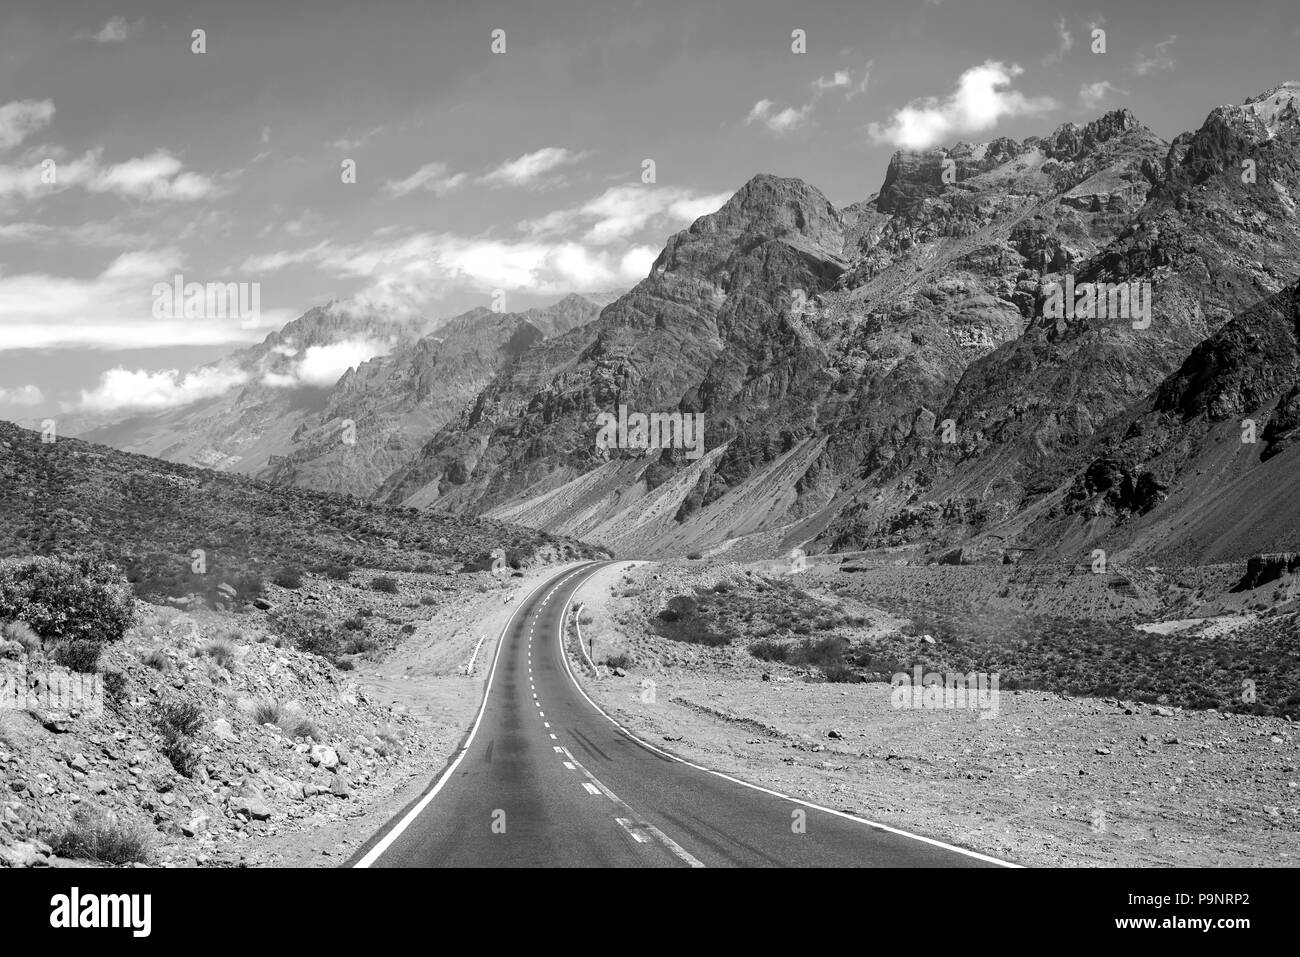 Mountain desert landscape with rocky hills and empty road of Argentina, south america in black and white. Stock Photo